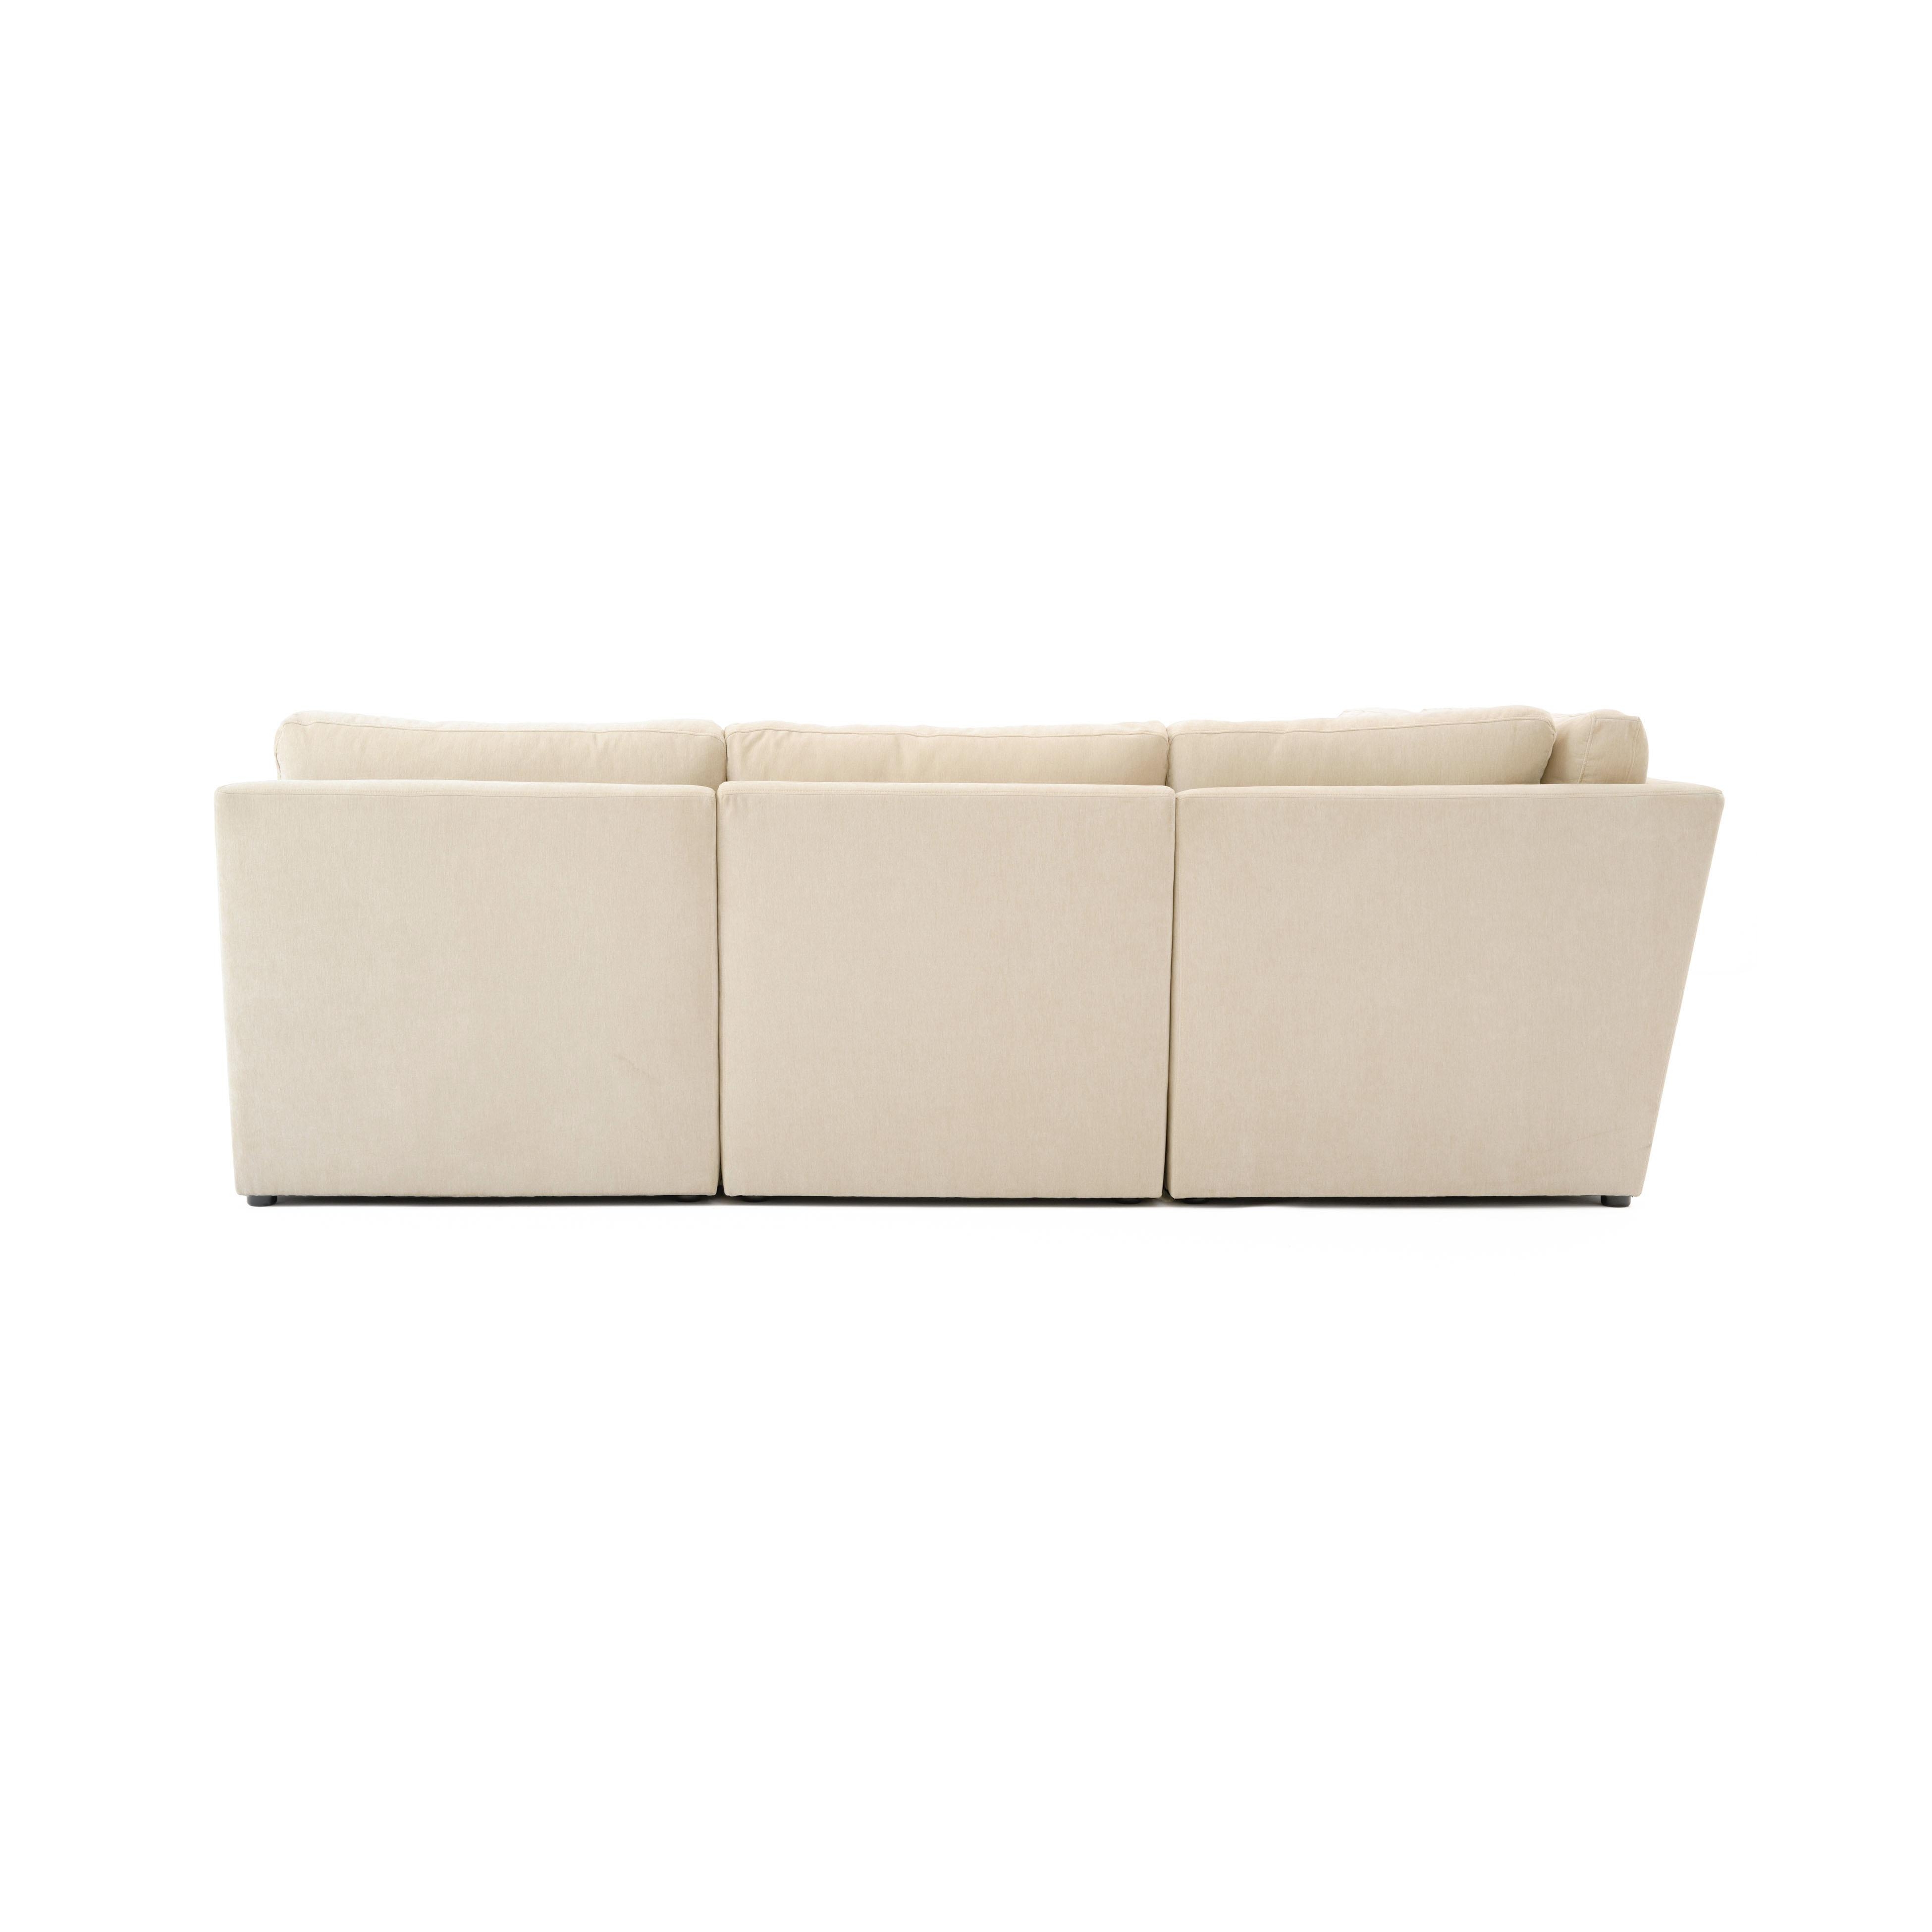 Aiden Beige Modular Chaise Sectional - Image 3